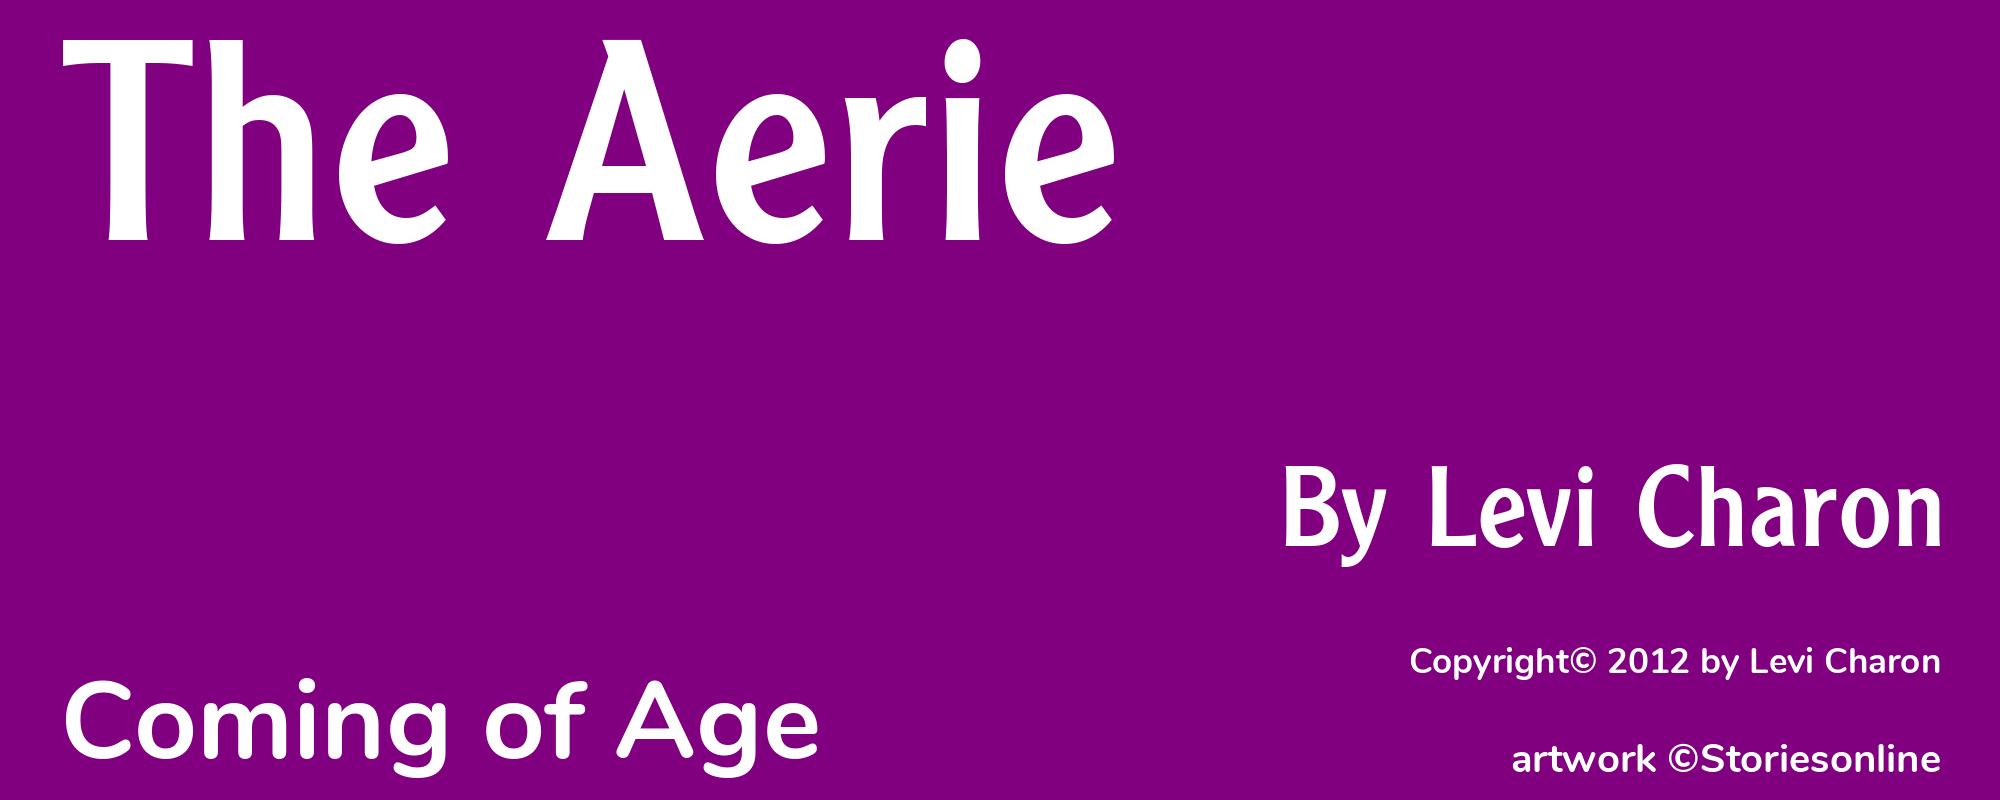 The Aerie - Cover